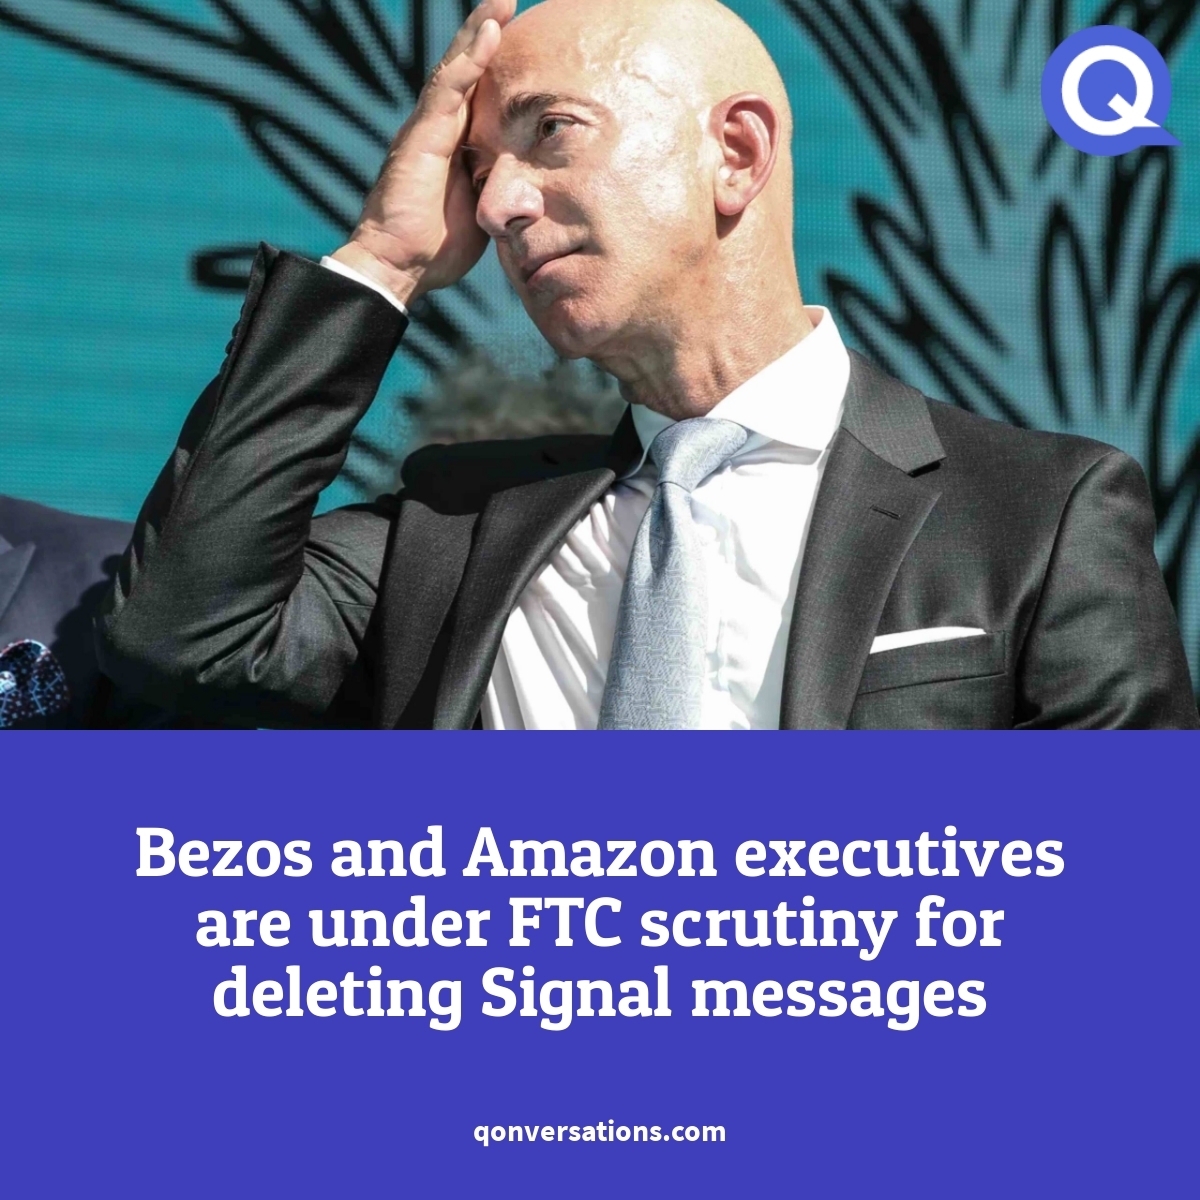 #us #Amazon FTC has accused #Bezos of using Signal's disappearing chat messages, potentially erasing crucial evidence that could have been used in the agency's antitrust case. Read more: qonversations.com/bezos-and-amaz…